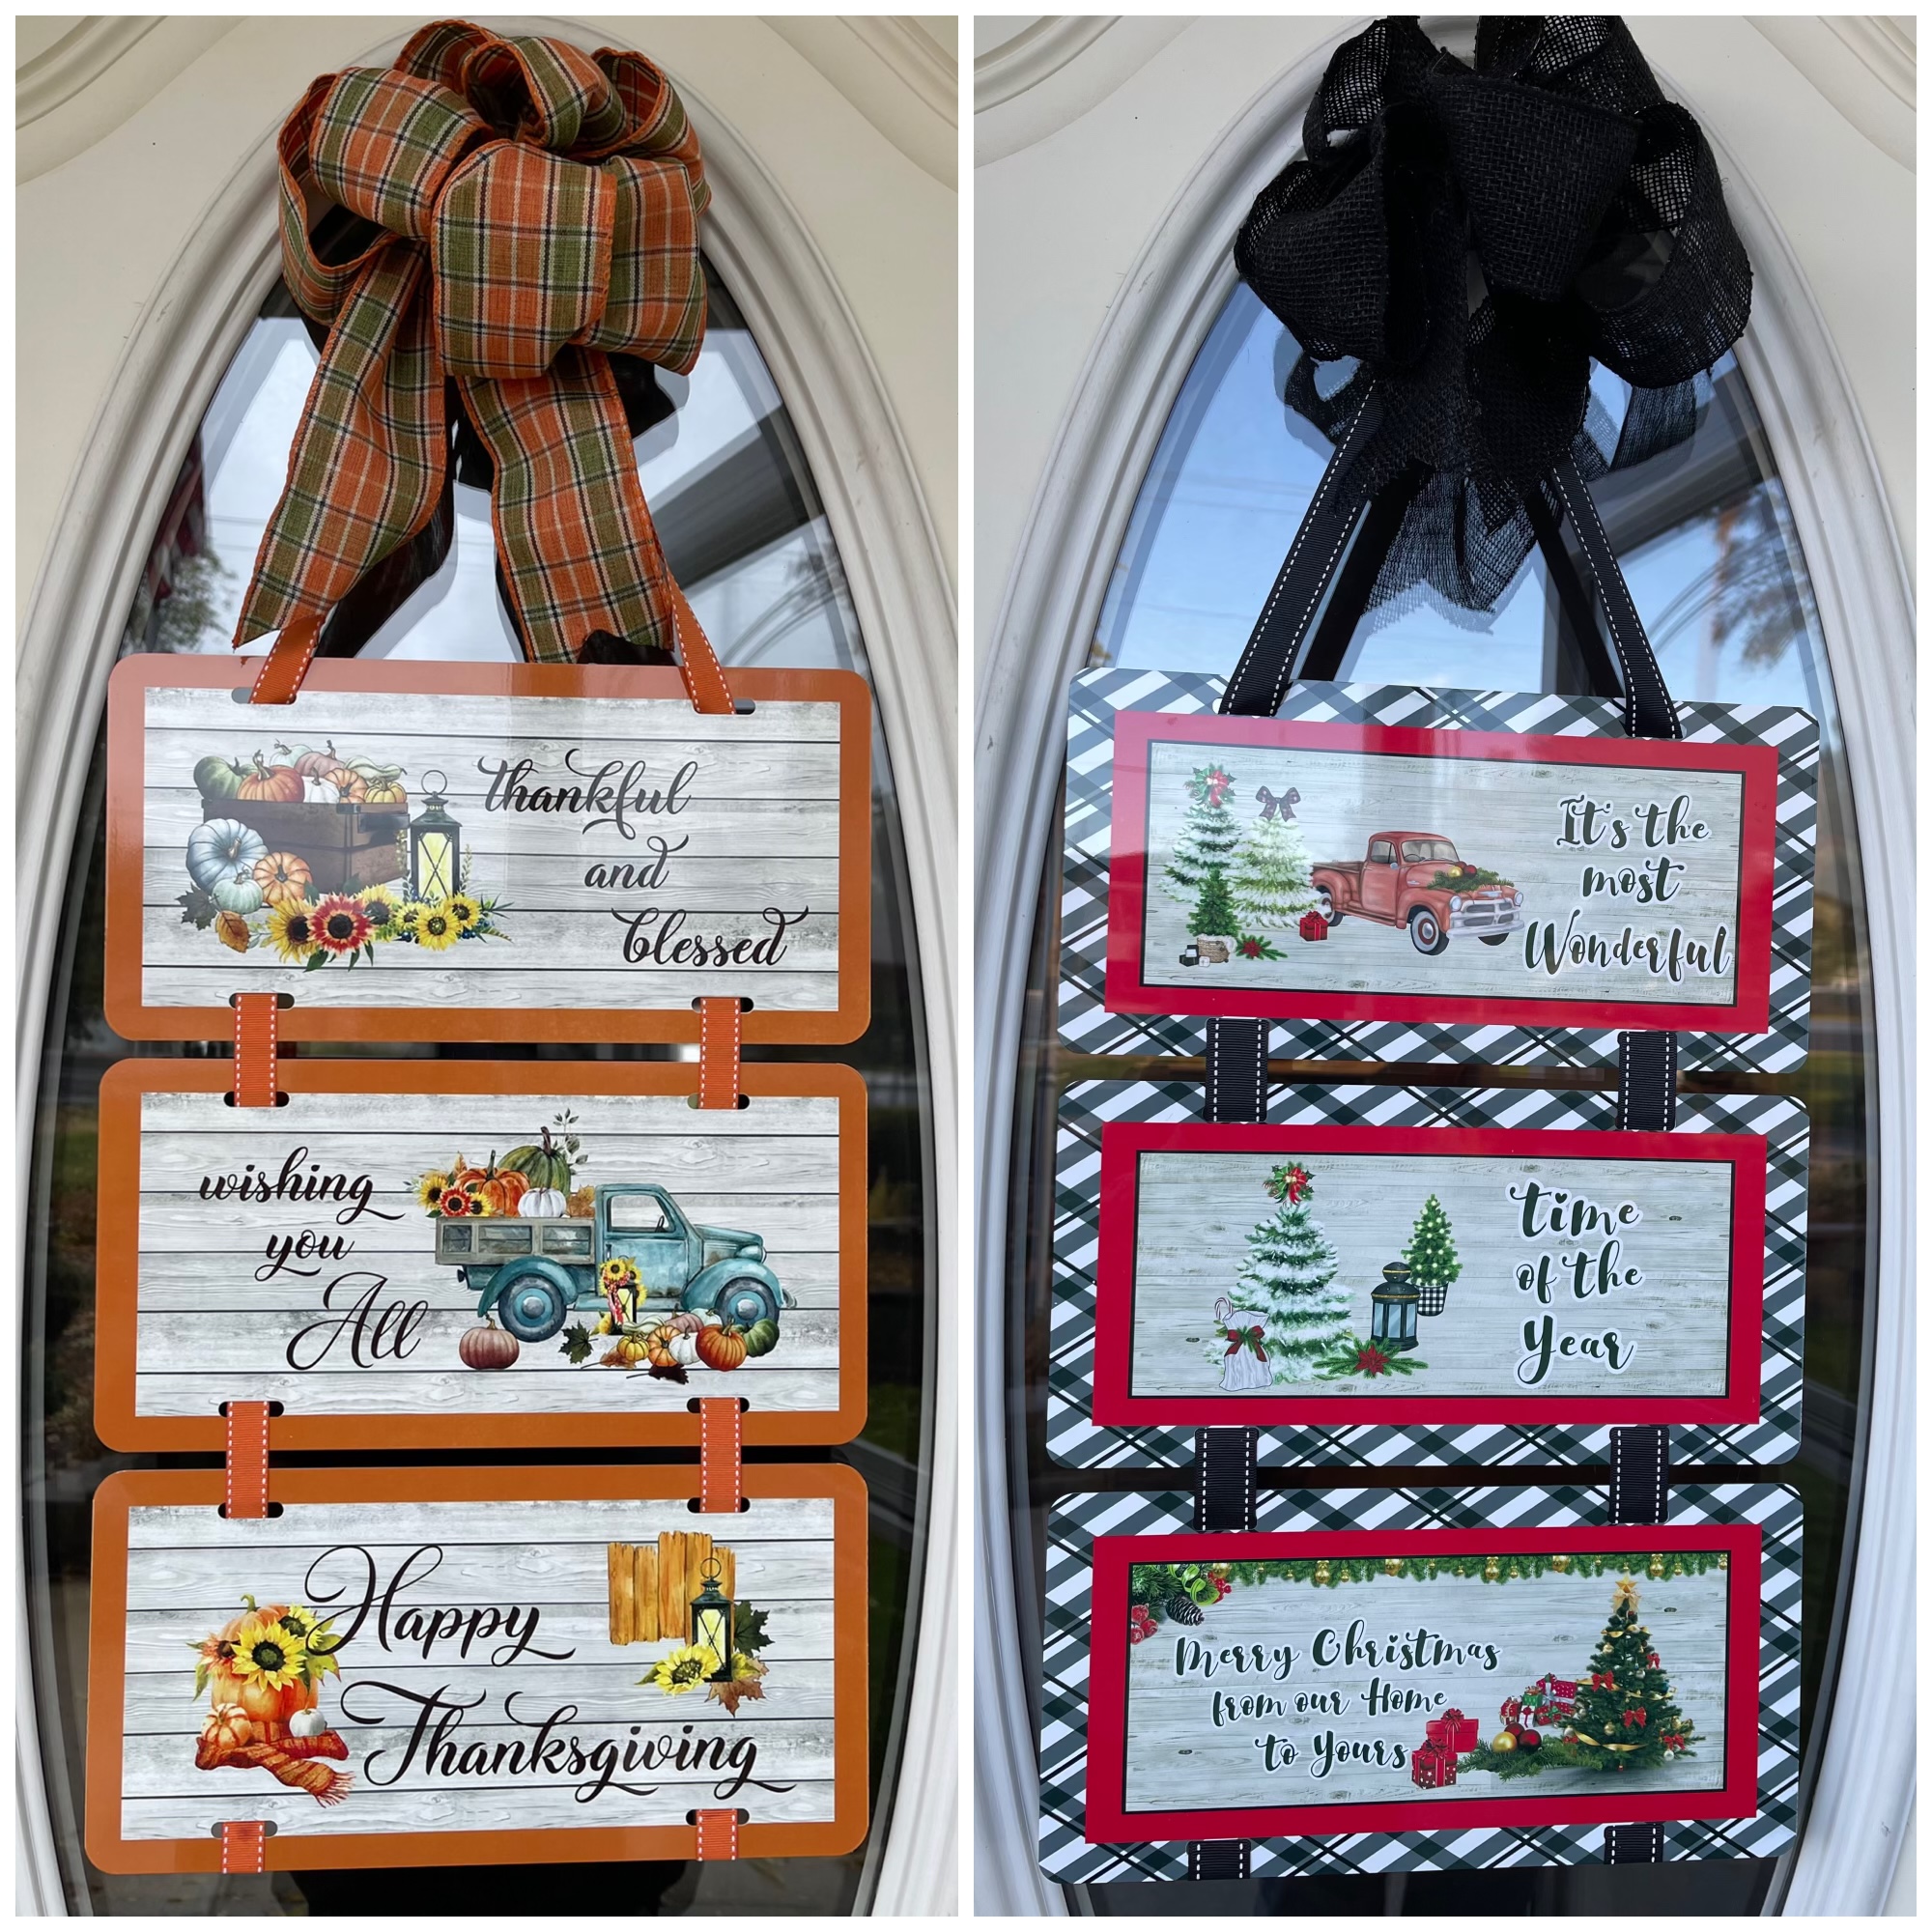 Getting ready for the holiday season coming up!  Door hanging signs made out of license plates 